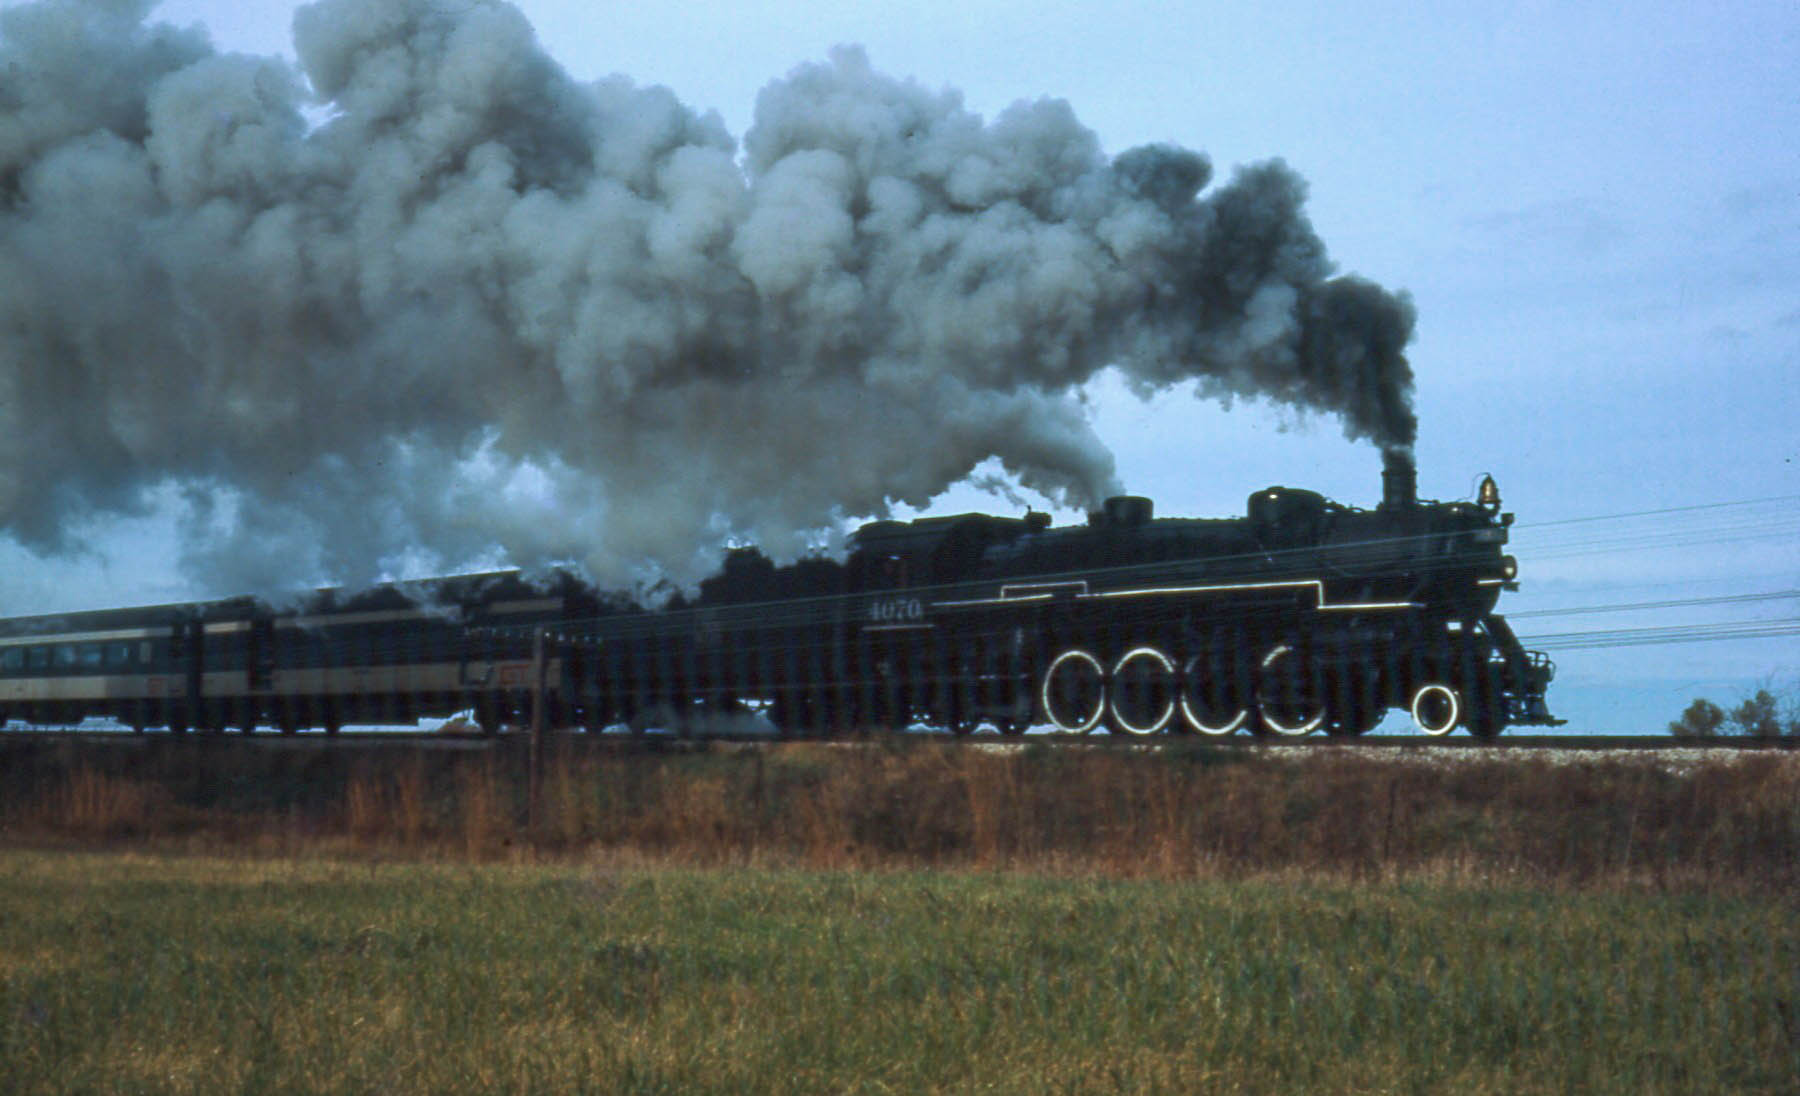 steam rises from the top of a train passing by a grassy field